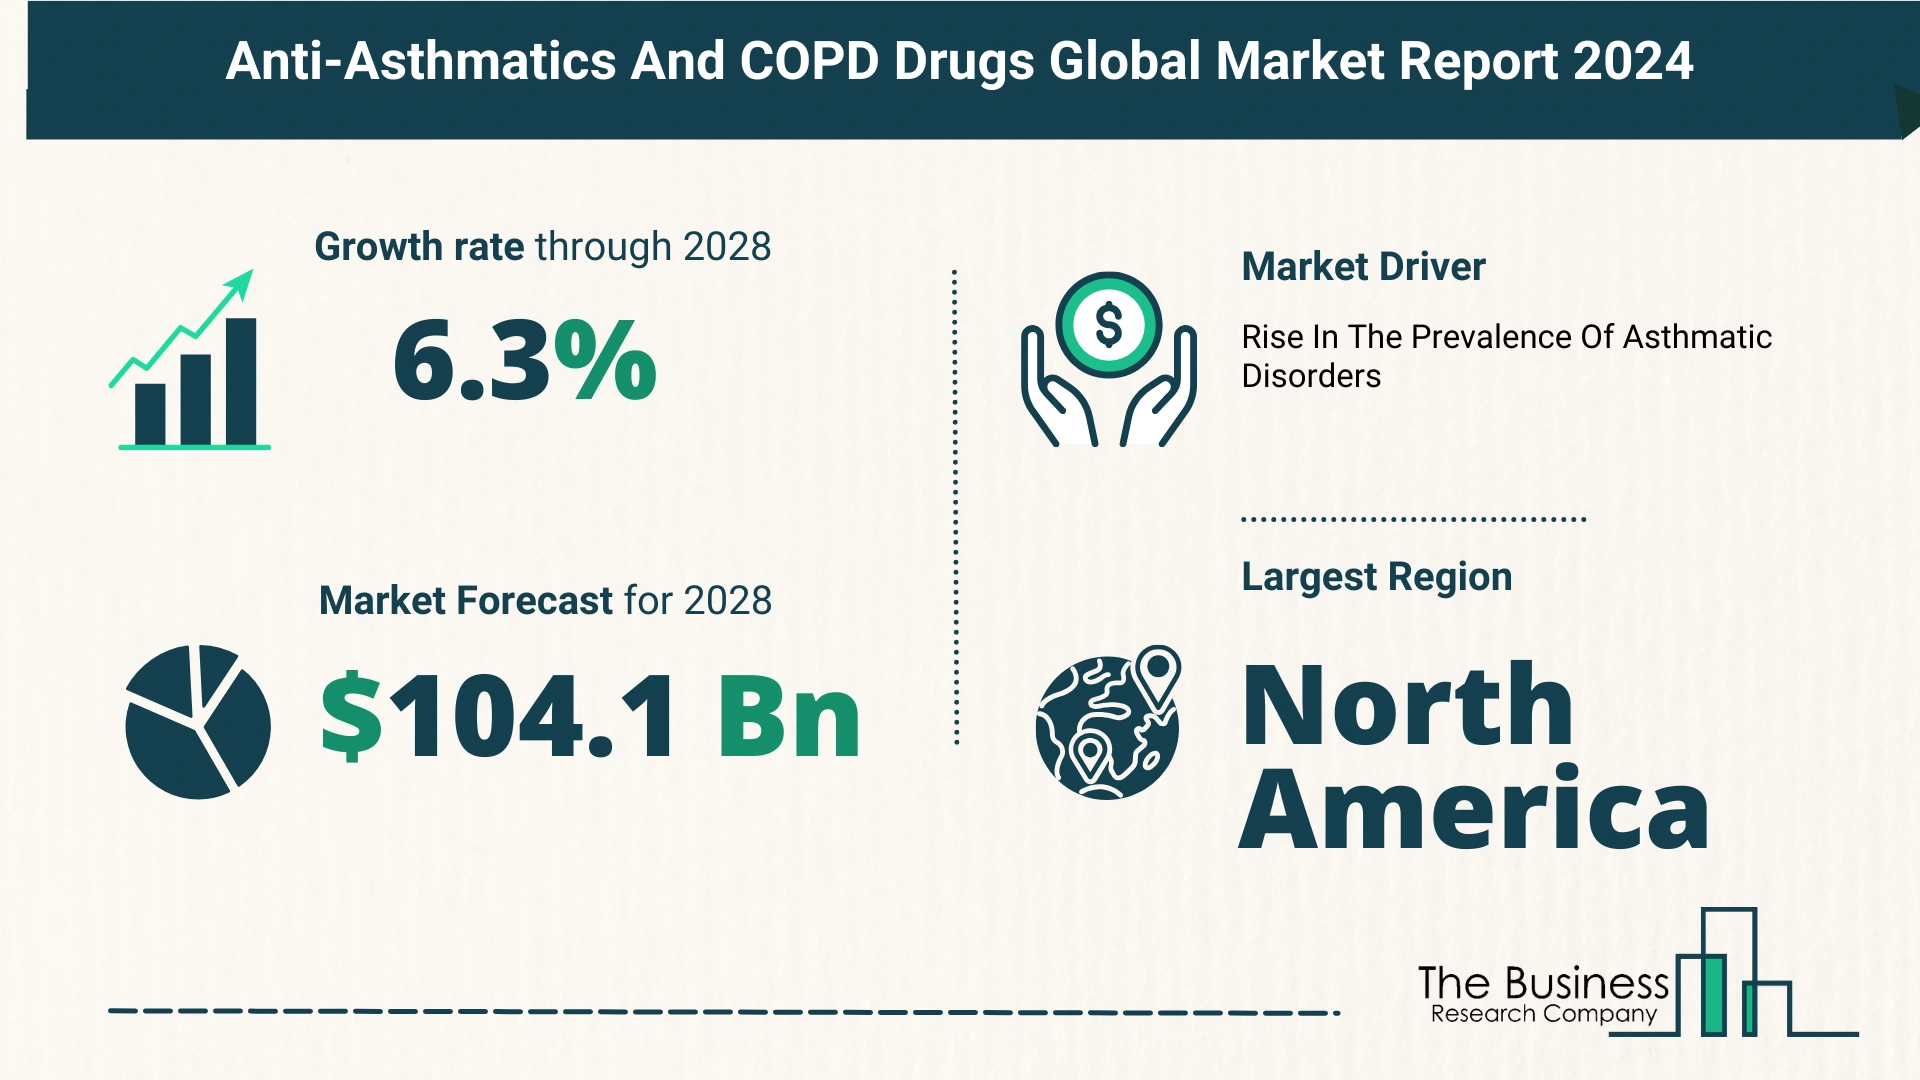 Key Insights On The Anti-Asthmatics And COPD Drugs Market 2024 – Size, Driver, And Major Players